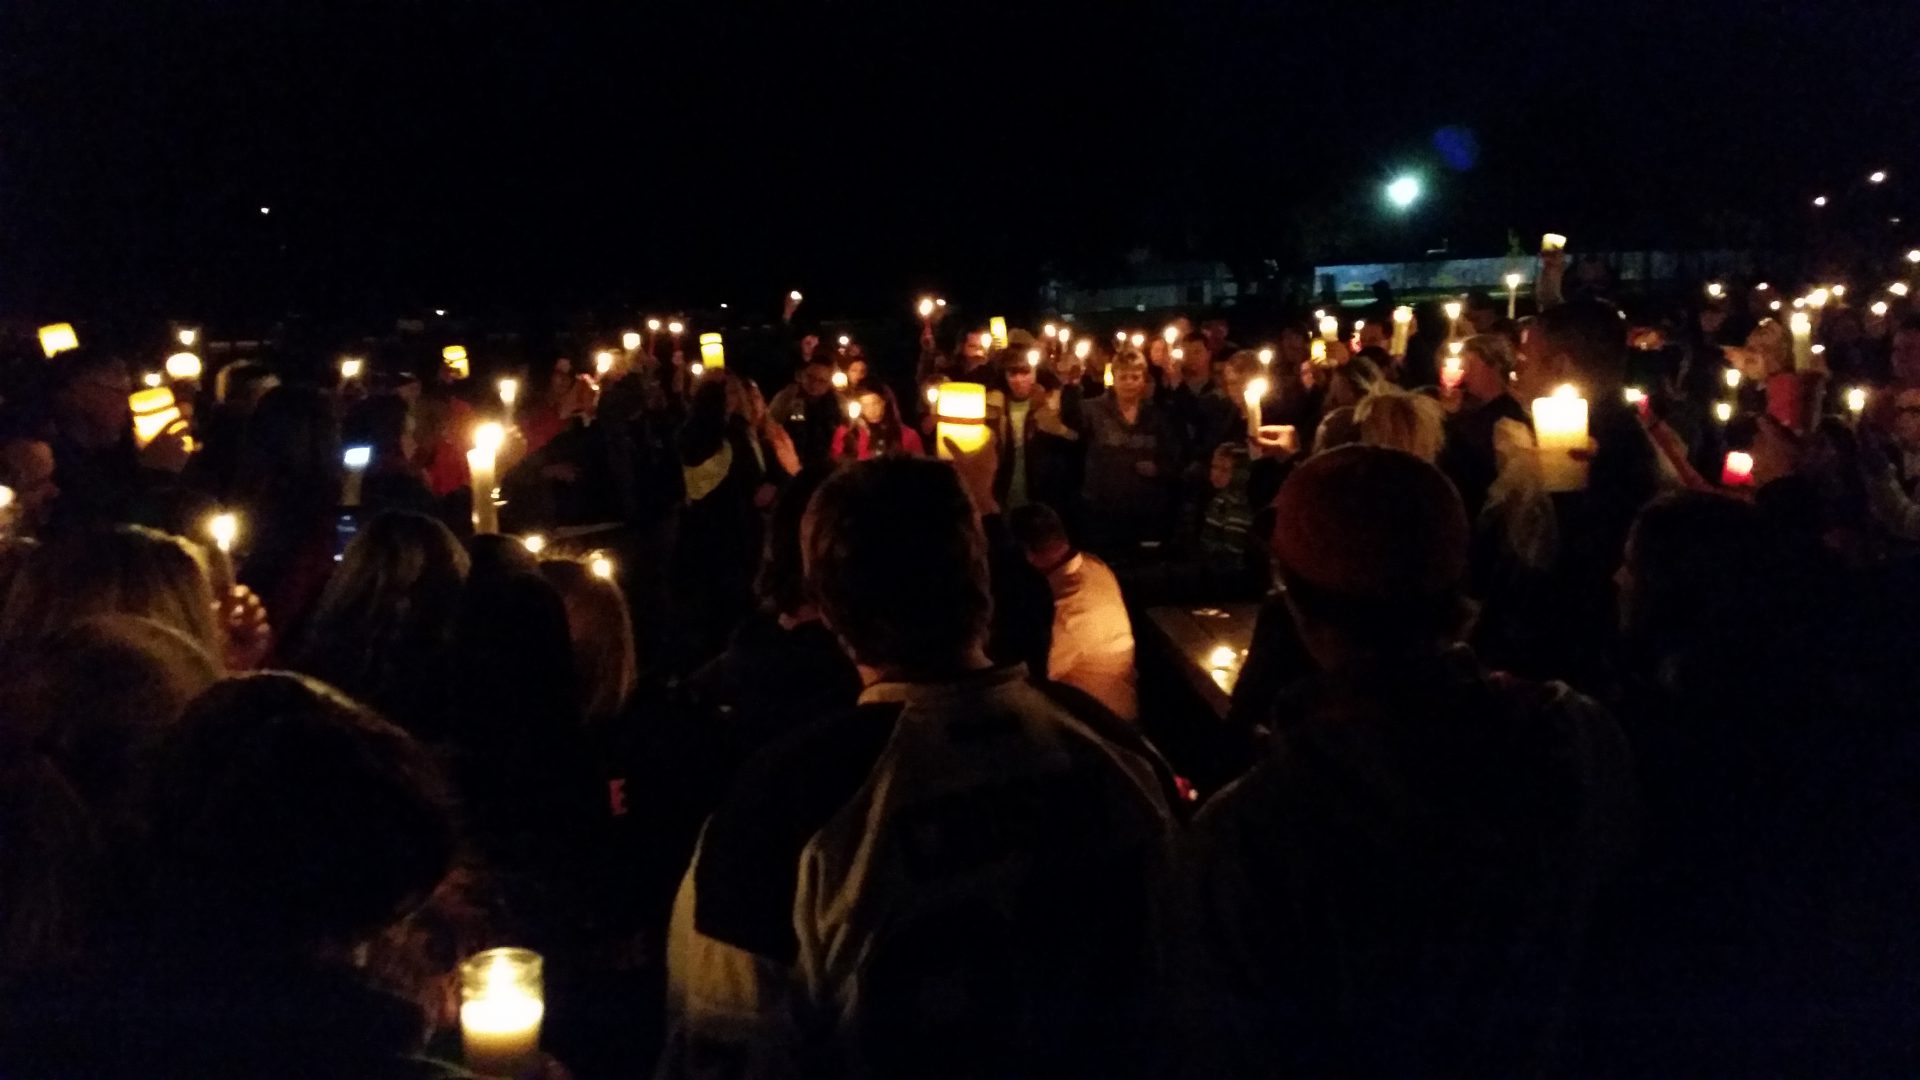 Candlelight vigil held for Blairmore murder victims